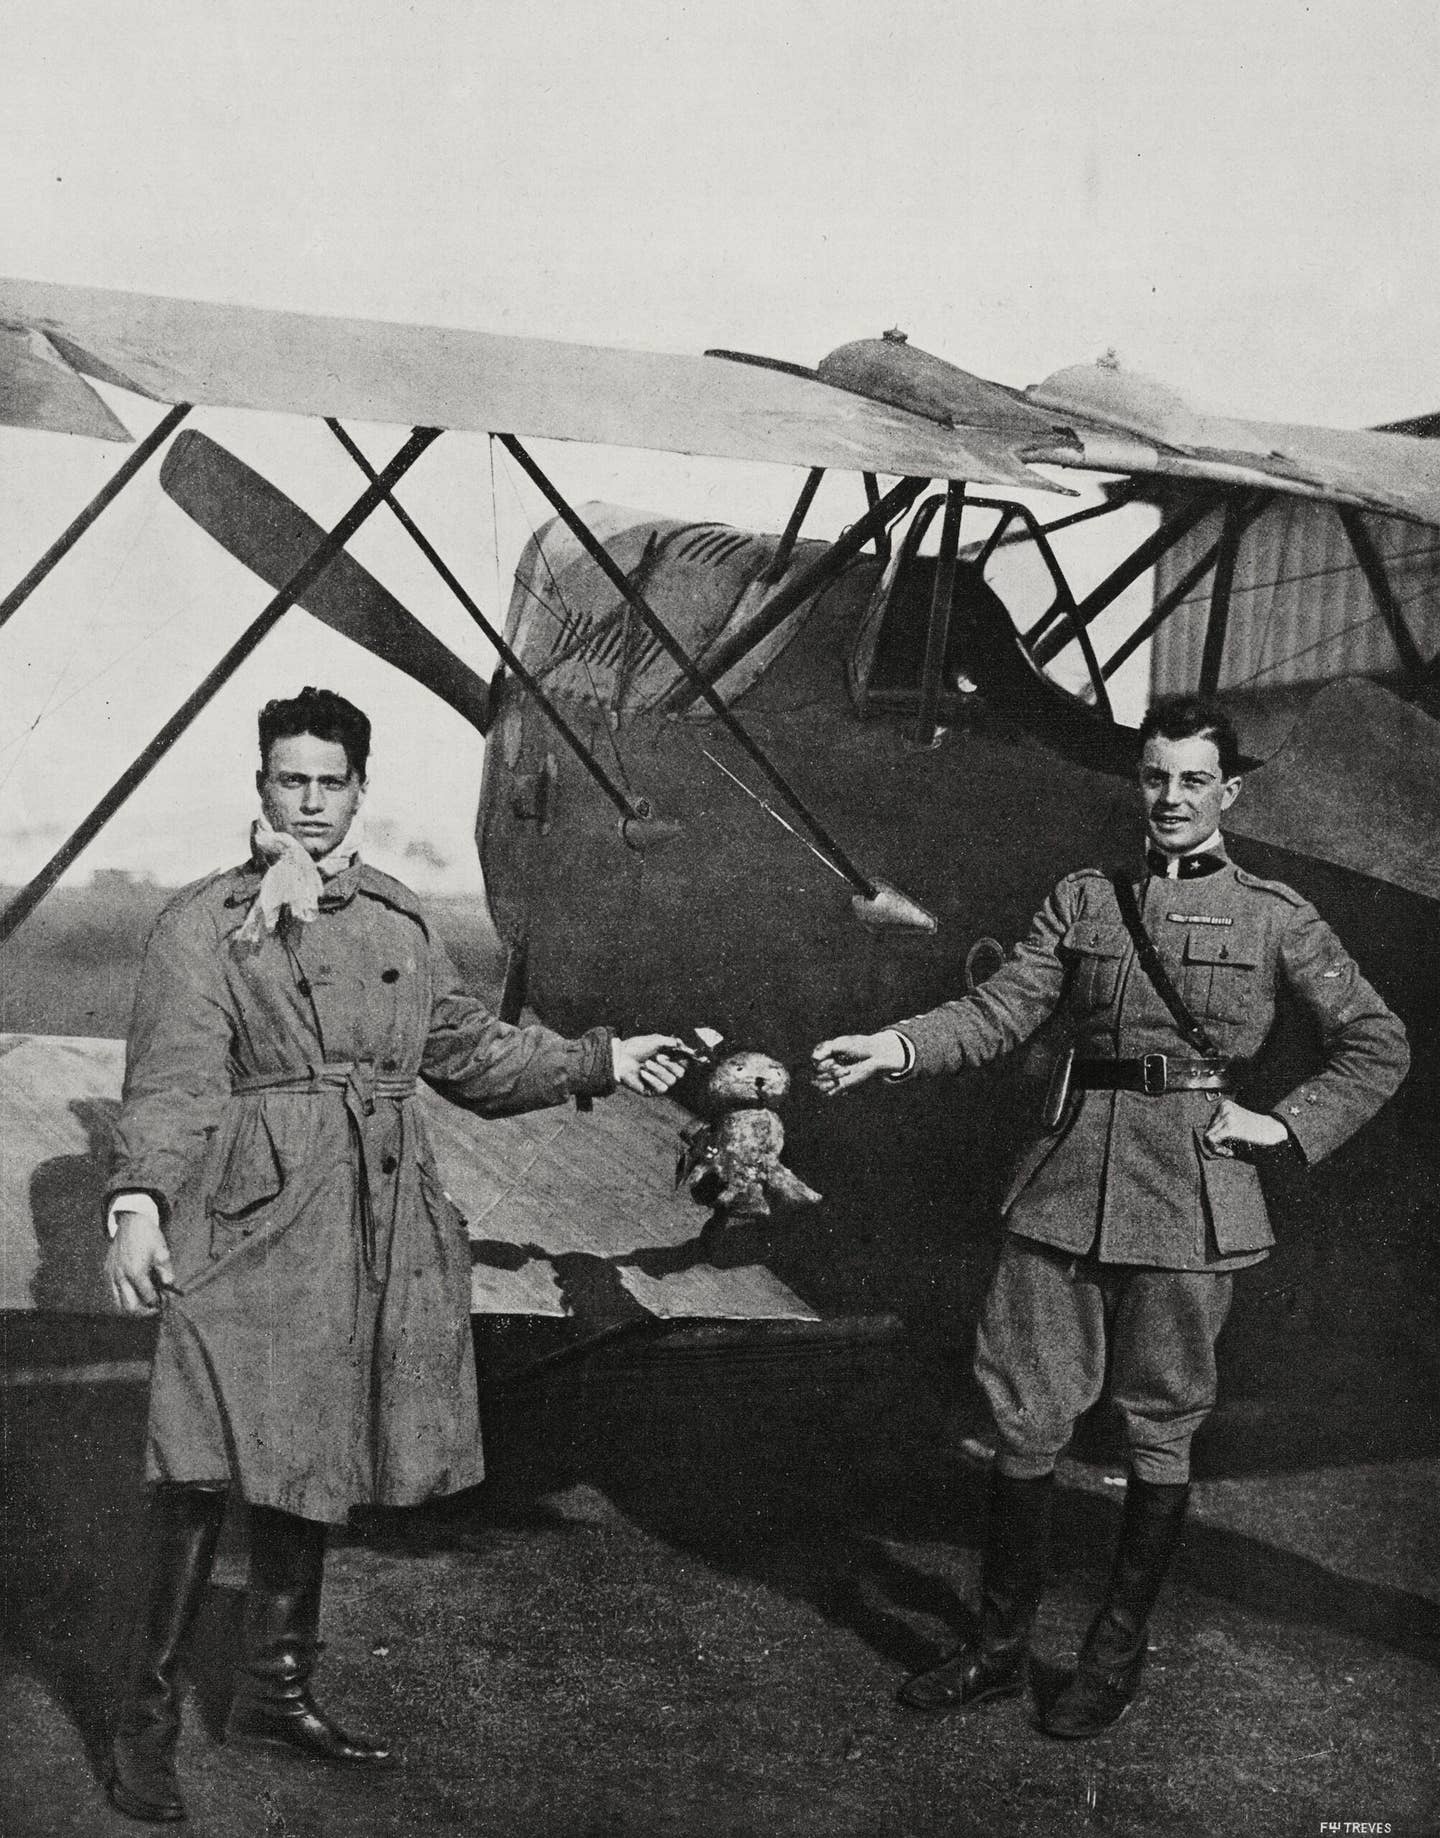 The pilots Arturo Ferrarin and Guido Masiero arrive in Tokyo on May 31, 1920, after having left Rome on February 14, 1920. <em>Getty Images</em>